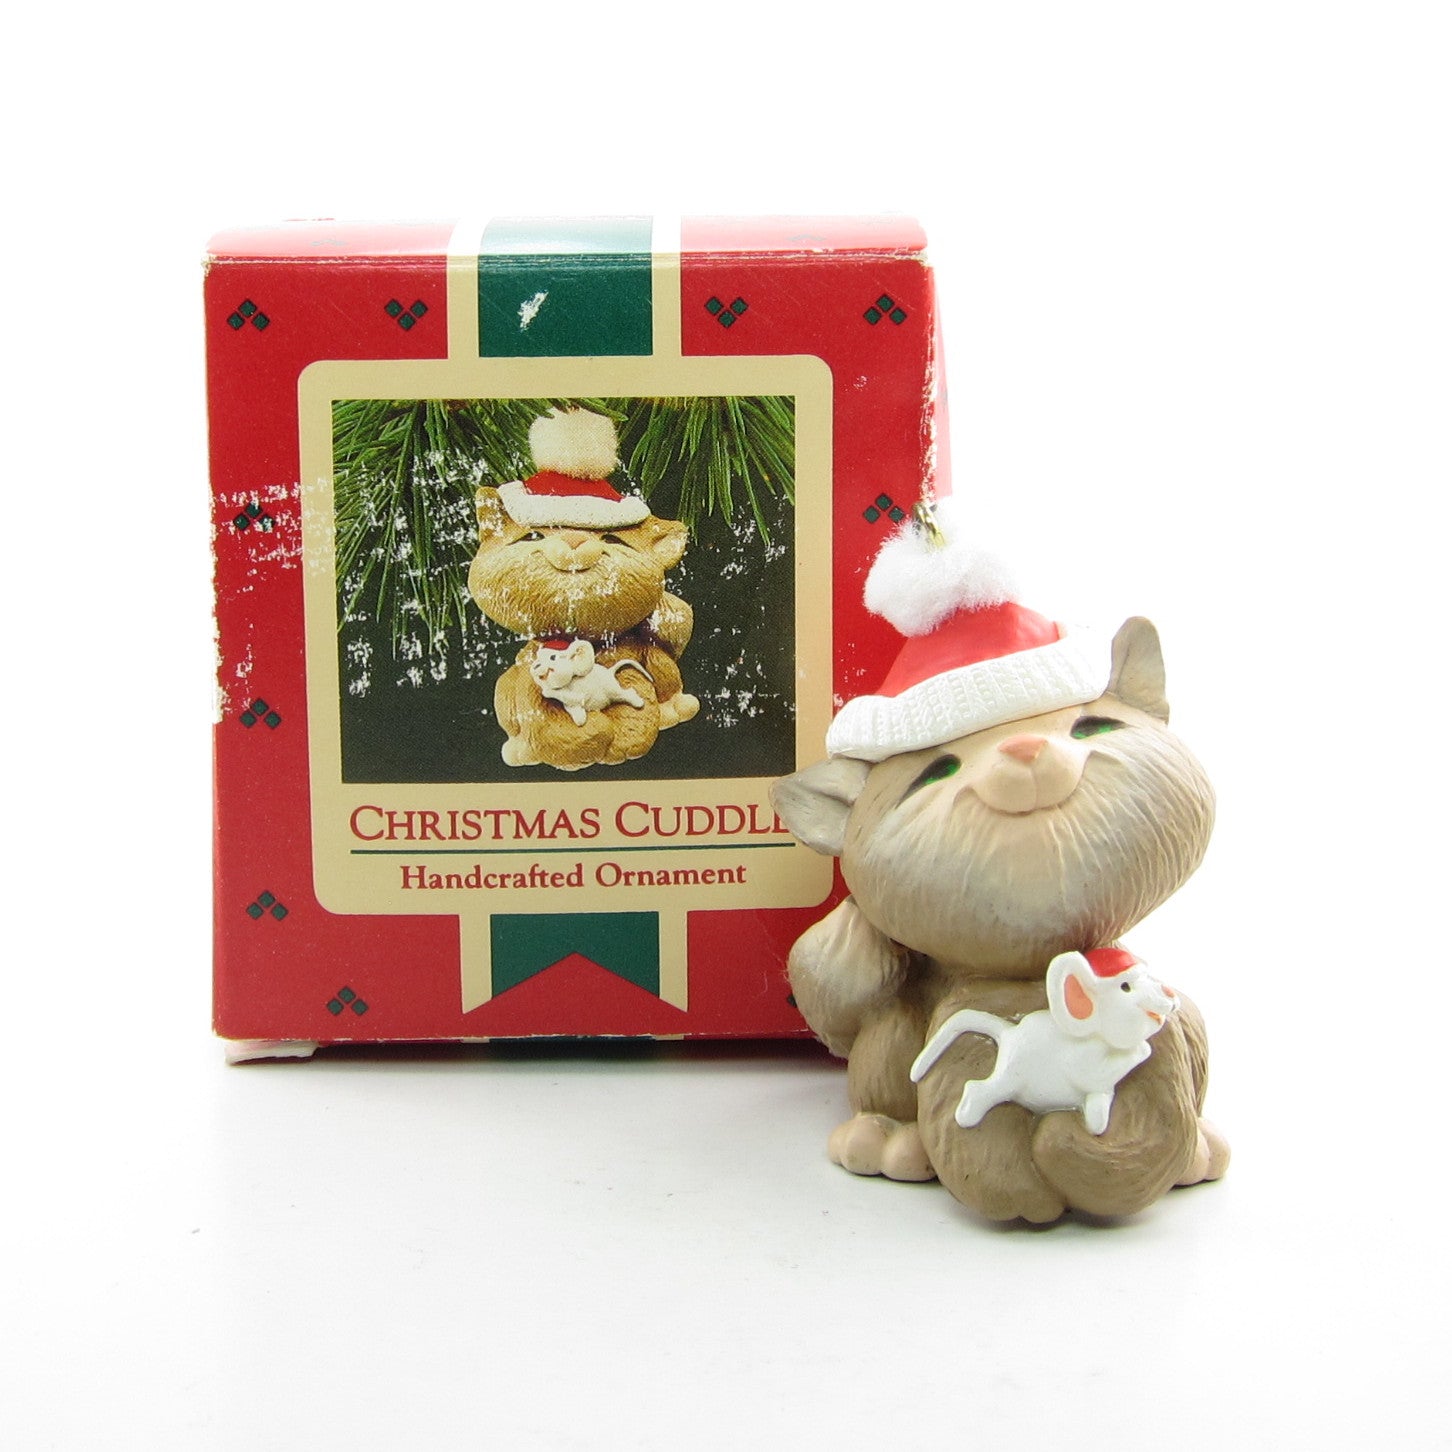 Christmas Cuddle vintage Hallmark ornament with cat and mouse in Santa hats